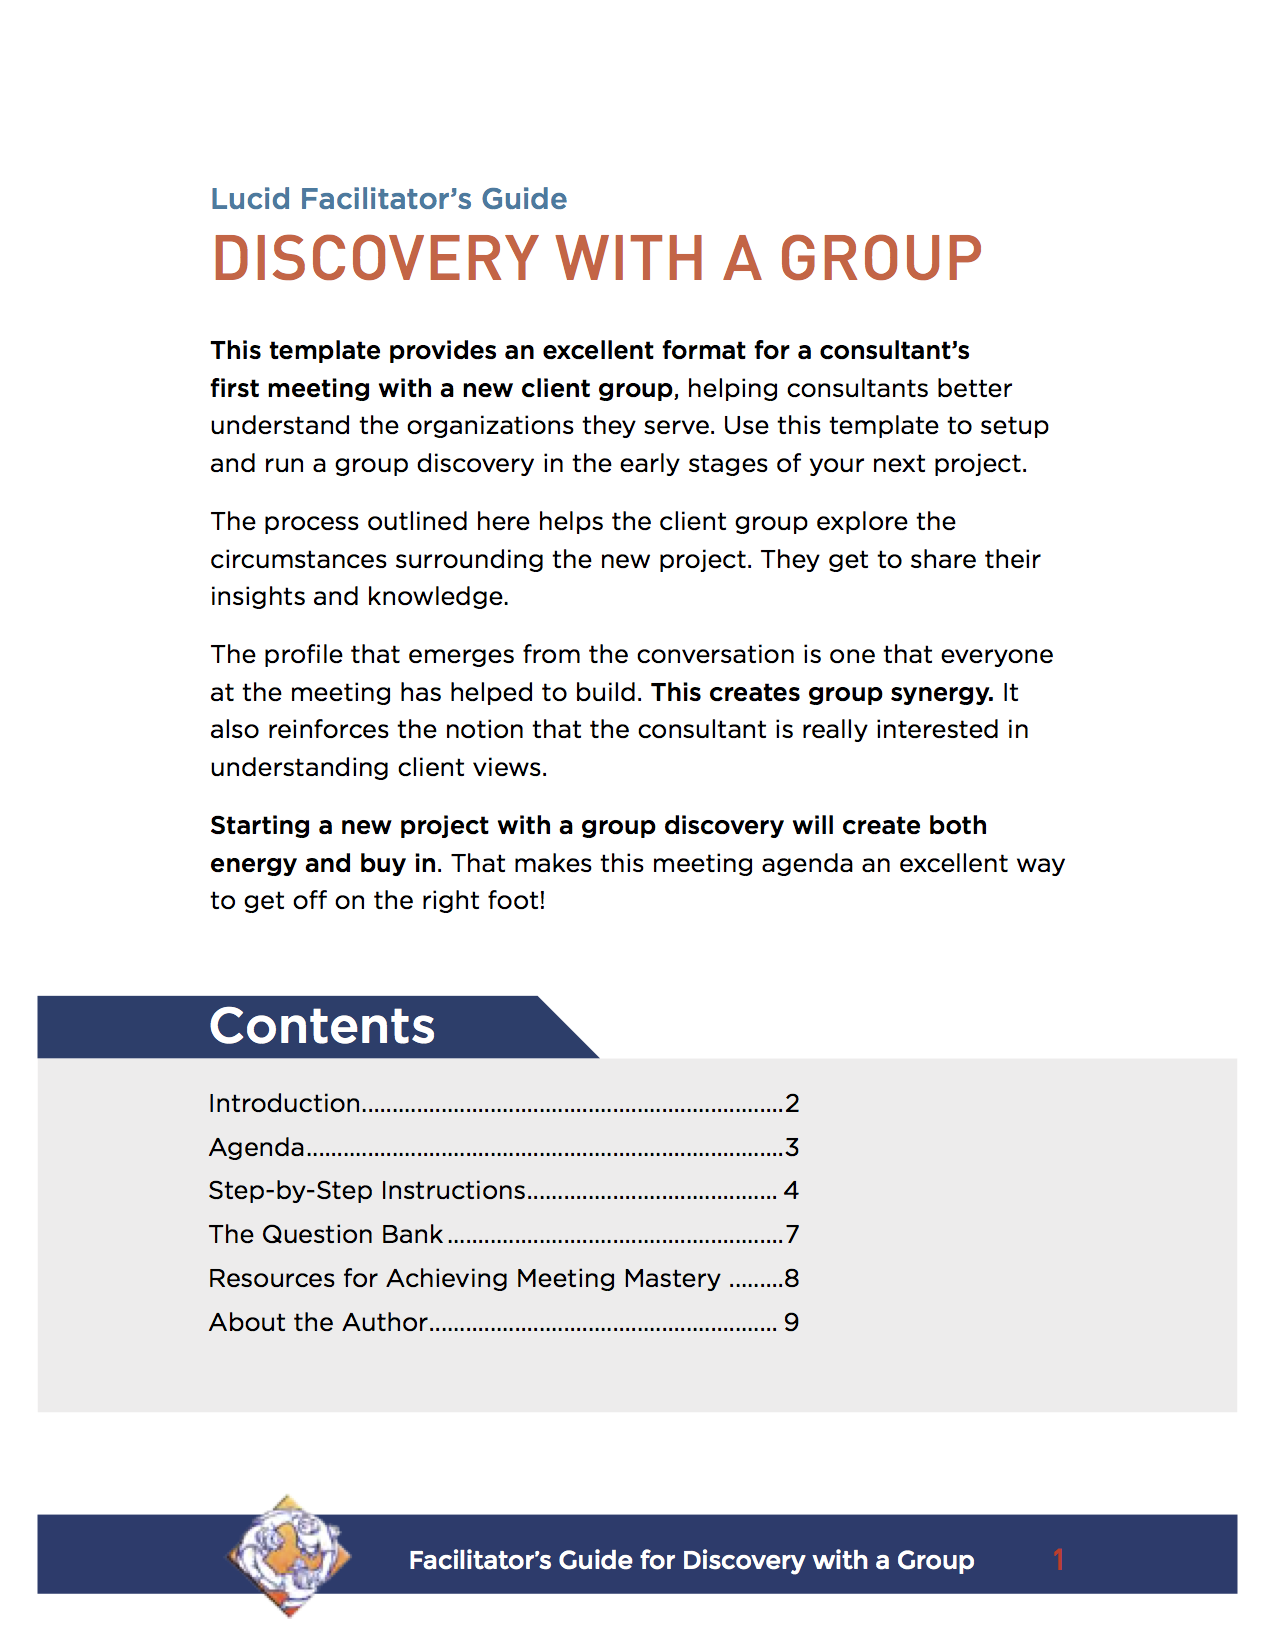 Discovery-Group-Facilitators-Guide.png